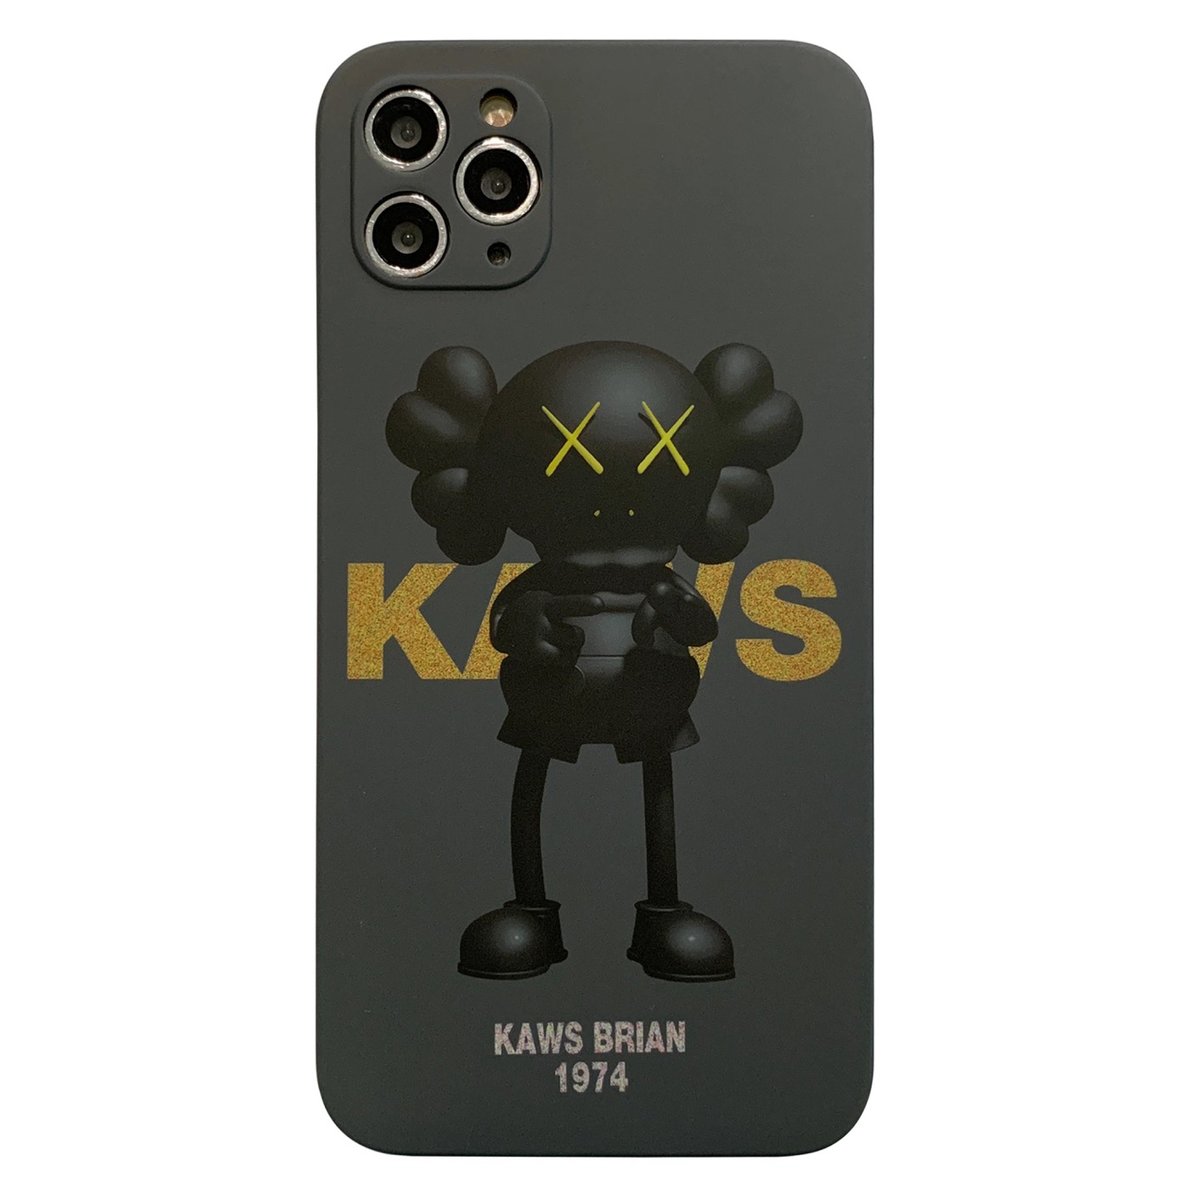 Image of KAWS BRIAN iPhone case